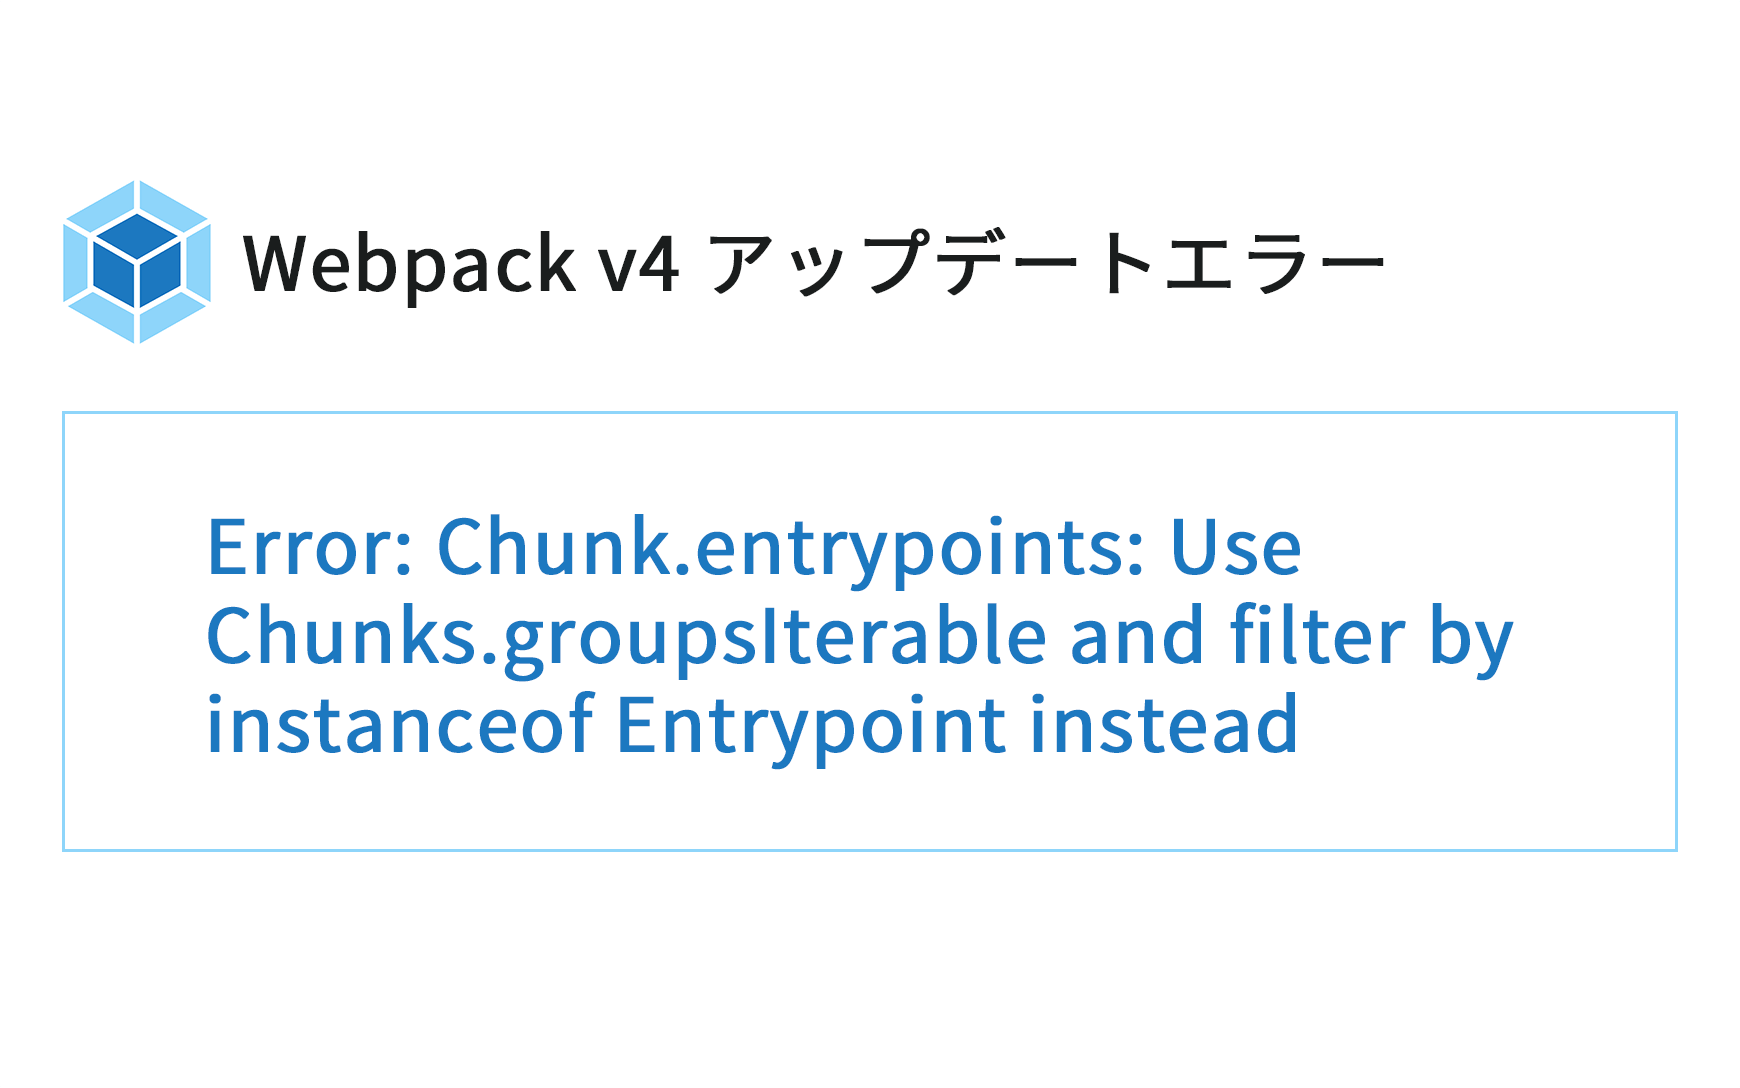 [Webpack4 アップデートエラー] Error: Chunk.entrypoints: Use Chunks.groupsIterable and filter by instanceof Entrypoint instead